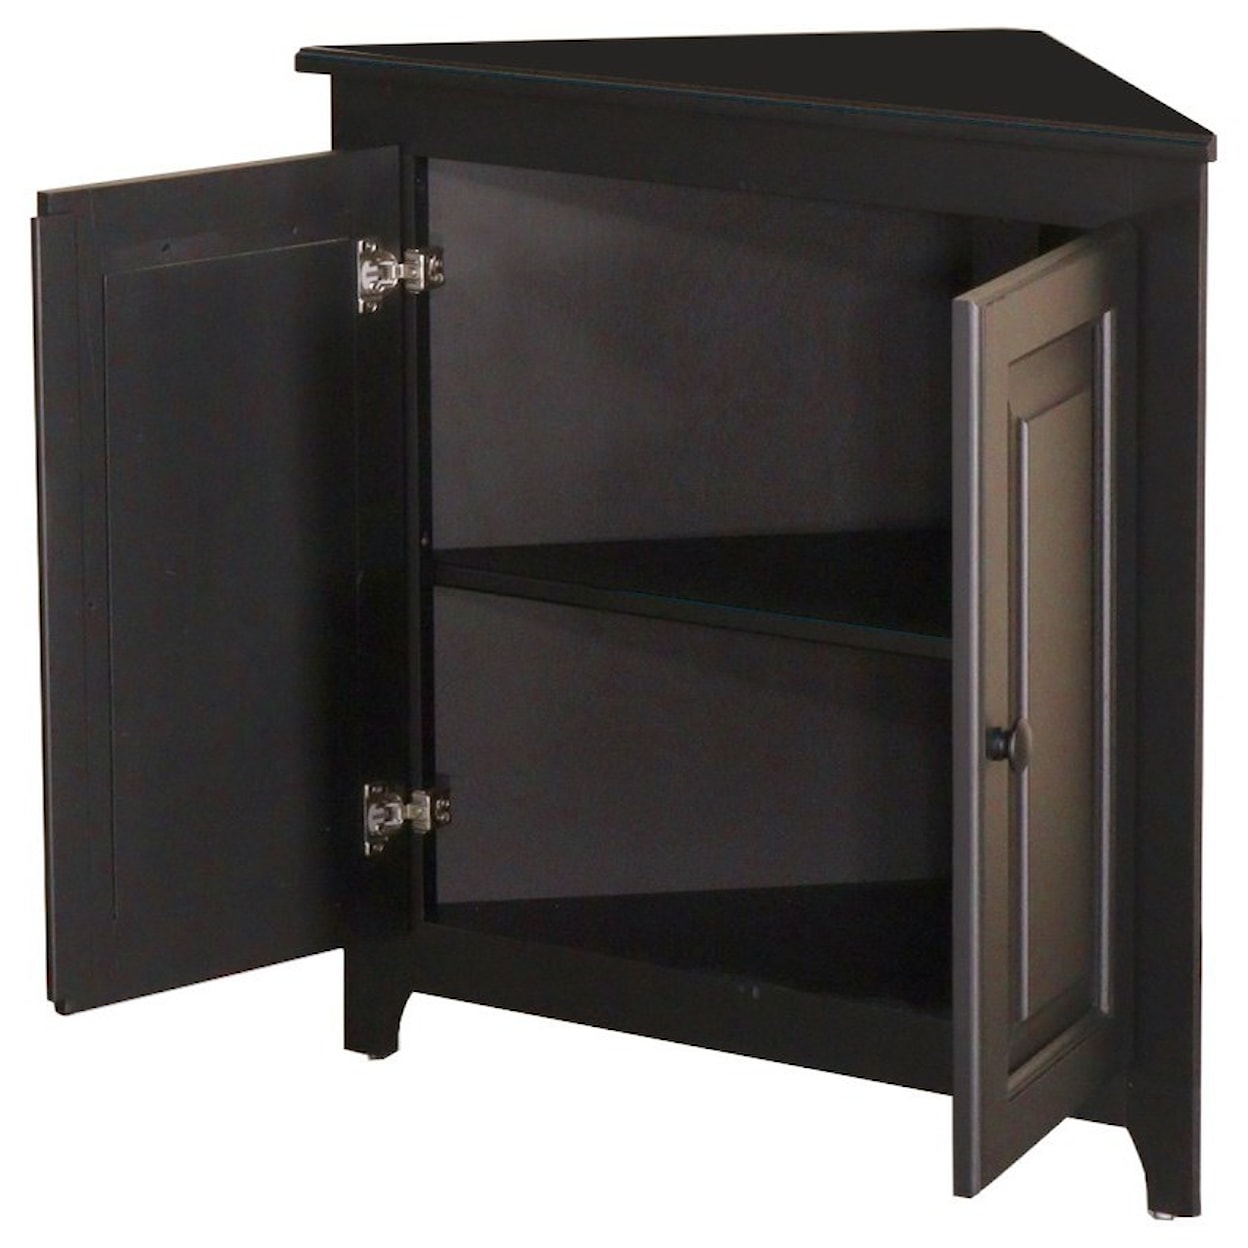 Archbold Furniture Pantries and Cabinets Corner Shelf with Doors